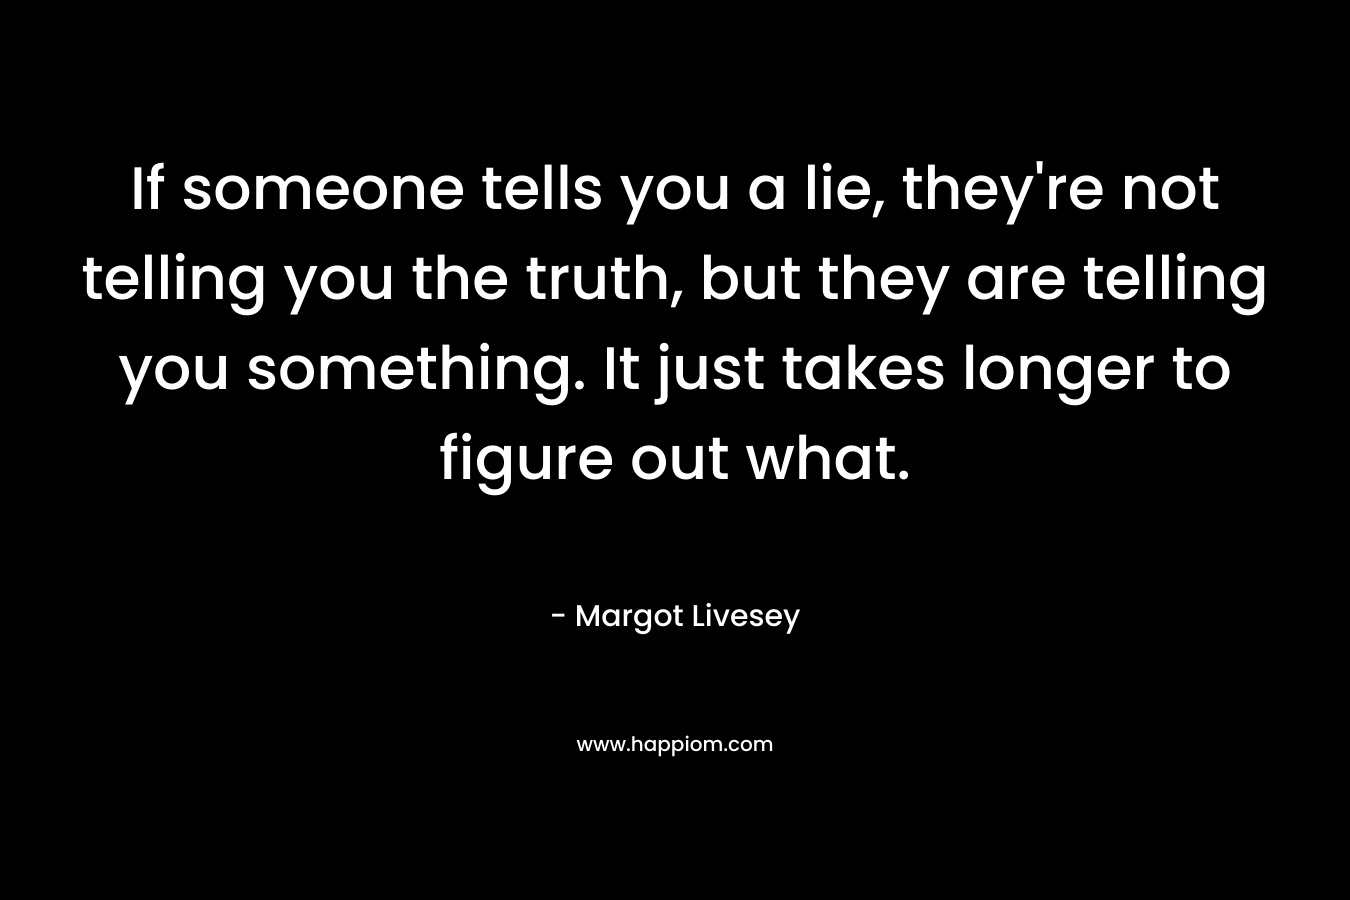 If someone tells you a lie, they're not telling you the truth, but they are telling you something. It just takes longer to figure out what.